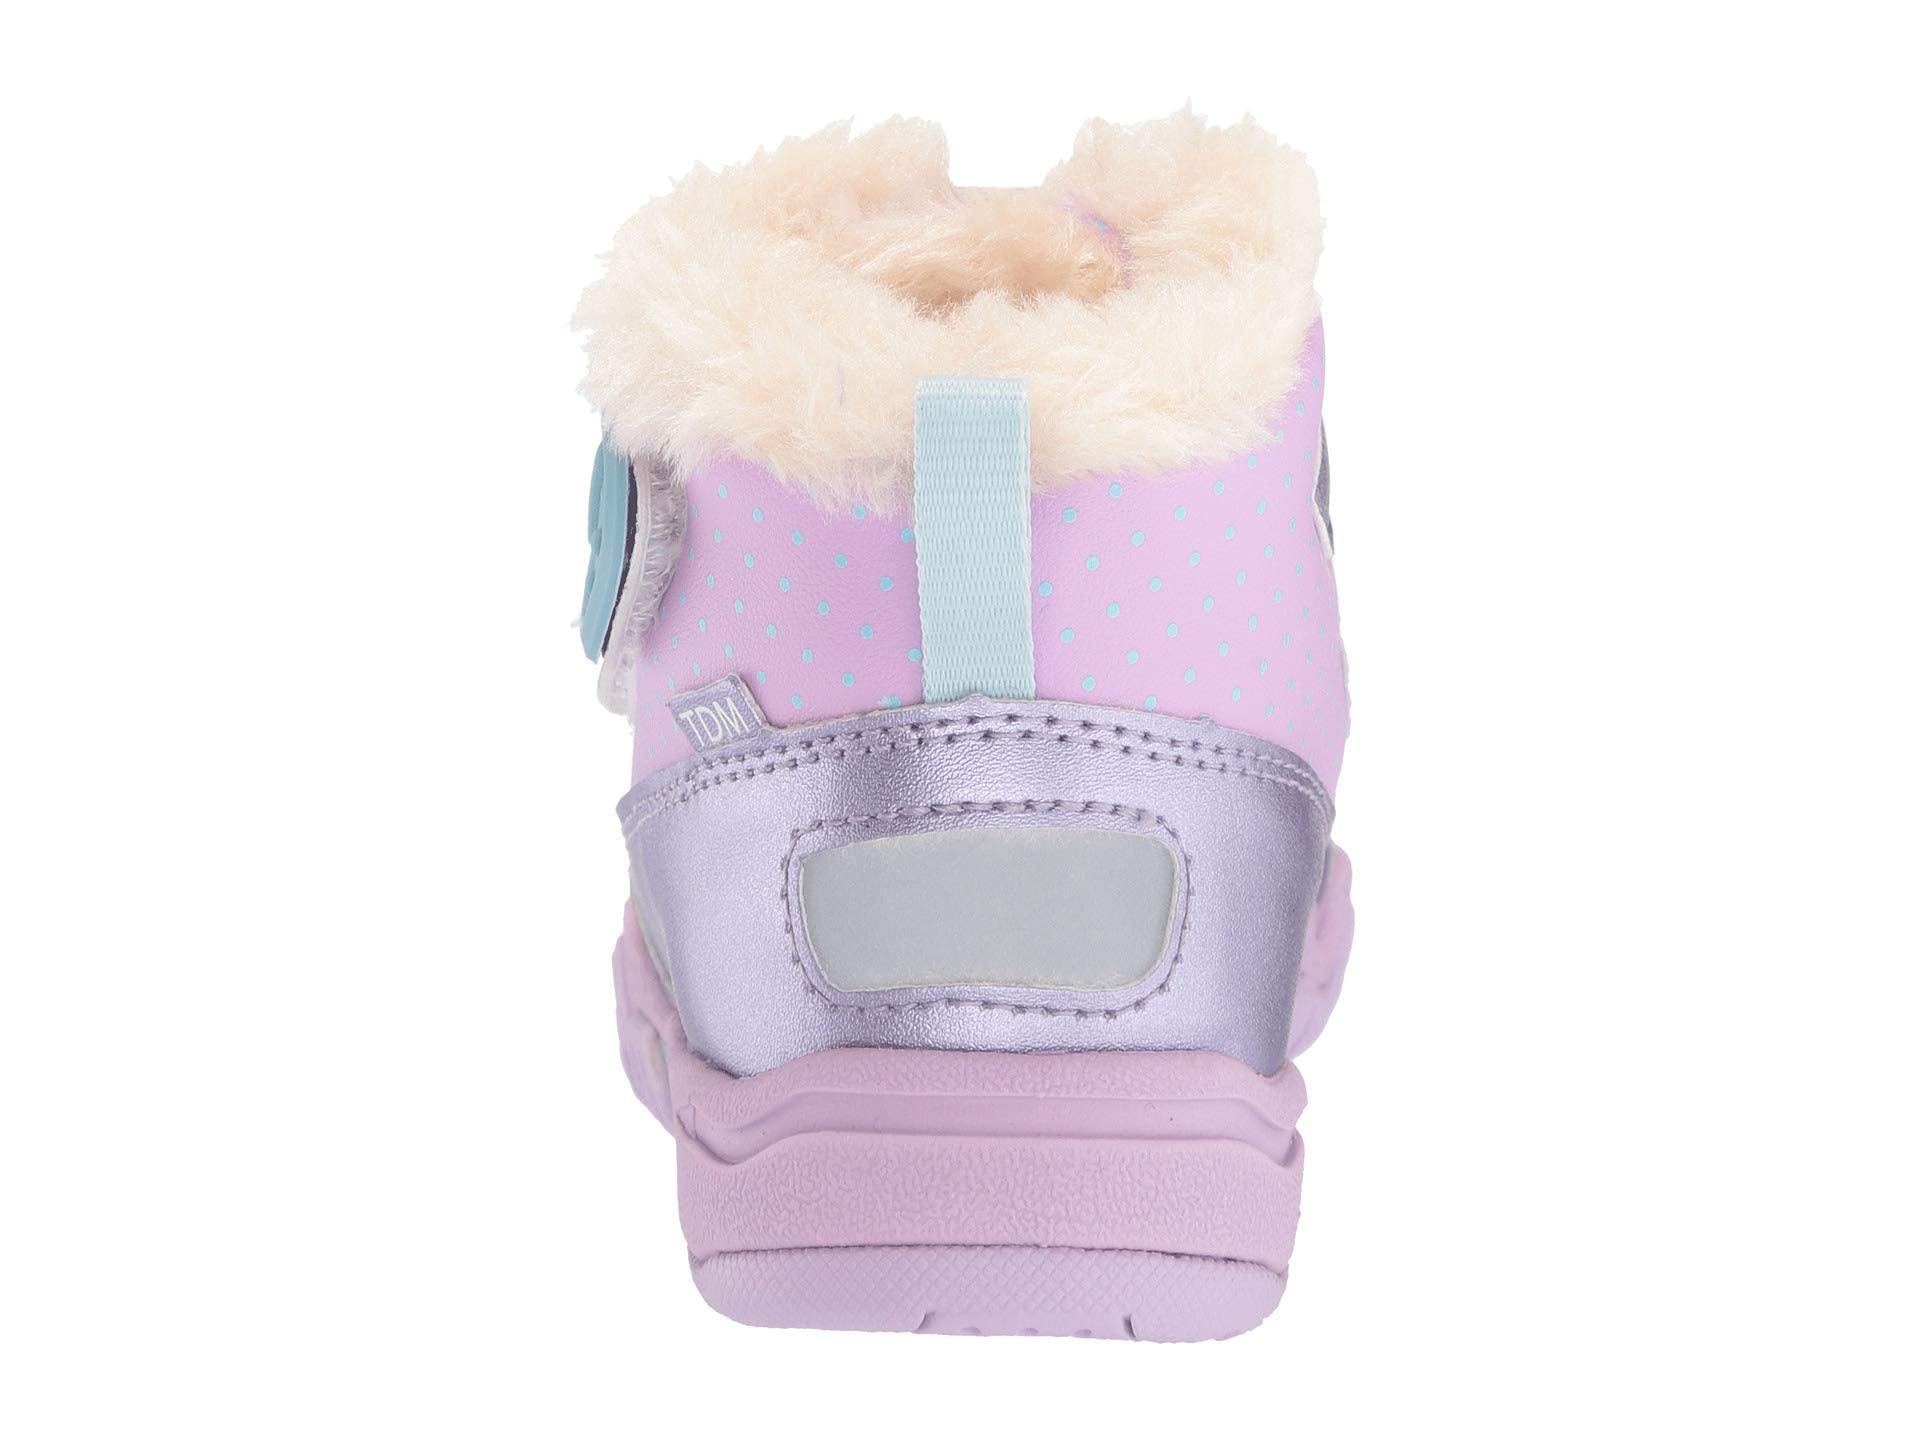 TSUKIHOSHI 7519 IGLOO Strap-Closure Machine-Washable Snow Boot with Wide Toe Box and Slip-Resistant, Non-Marking Outsole - For Toddlers and Little Kids, Ages 1-8